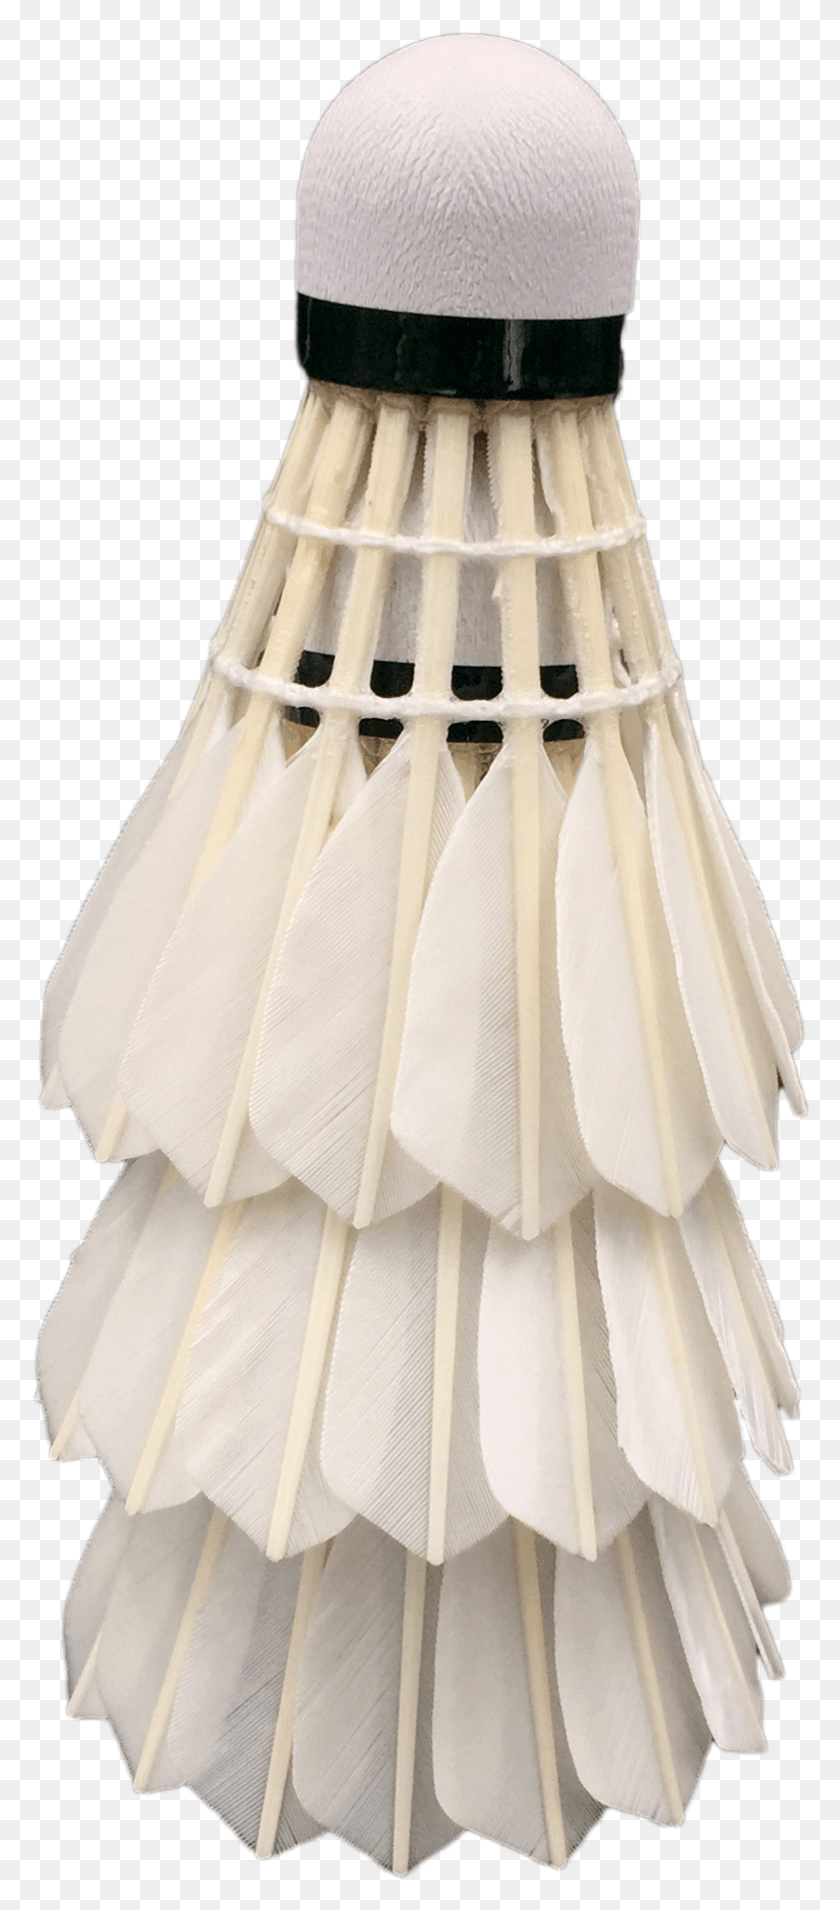 781x1853 Badminton Supplier Badminton Supplier Suppliers And Badminton, Lampshade, Lamp, Wedding Gown HD PNG Download